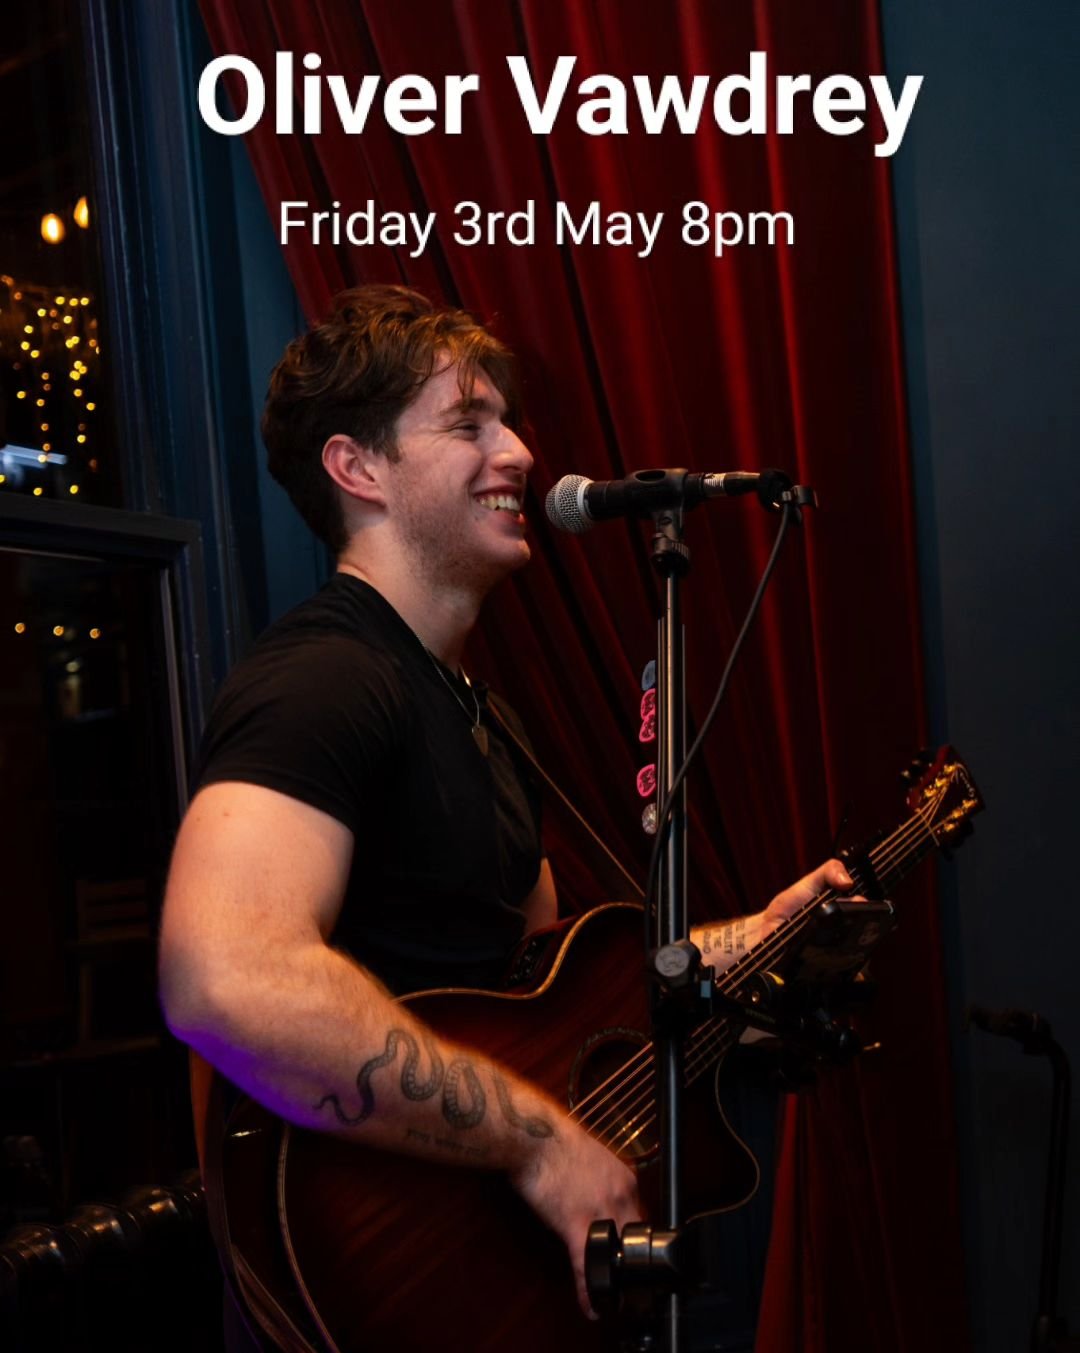 SAVE THE DATE!!

We have @olivervawdrey returning to @locus_bar_harrogate Friday 3rd May at 8pm!!

We loved Oliver's last performance with us so we knew we needed to get him back to play for you again🎸

Oliver is a guitarist / singer playing hits fr